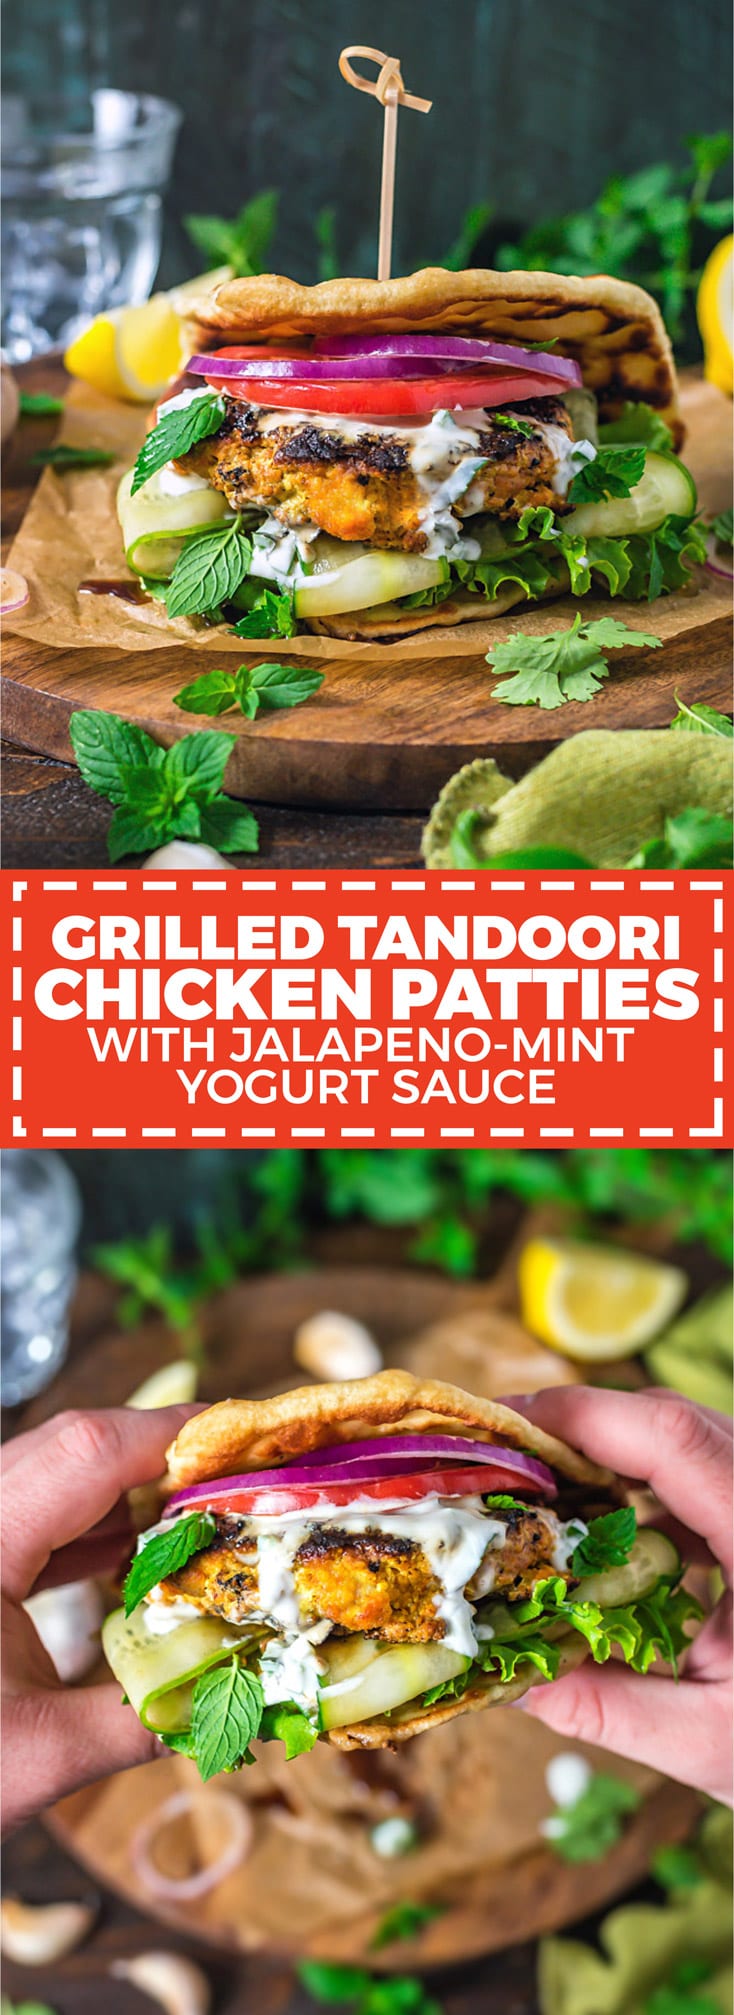 Grilled Tandoori Chicken Patties with Jalapeno-Mint Yogurt Sauce. These Indian-inspired grilled chicken patties are a welcome switch-up from burgers. | hostthetoast.com